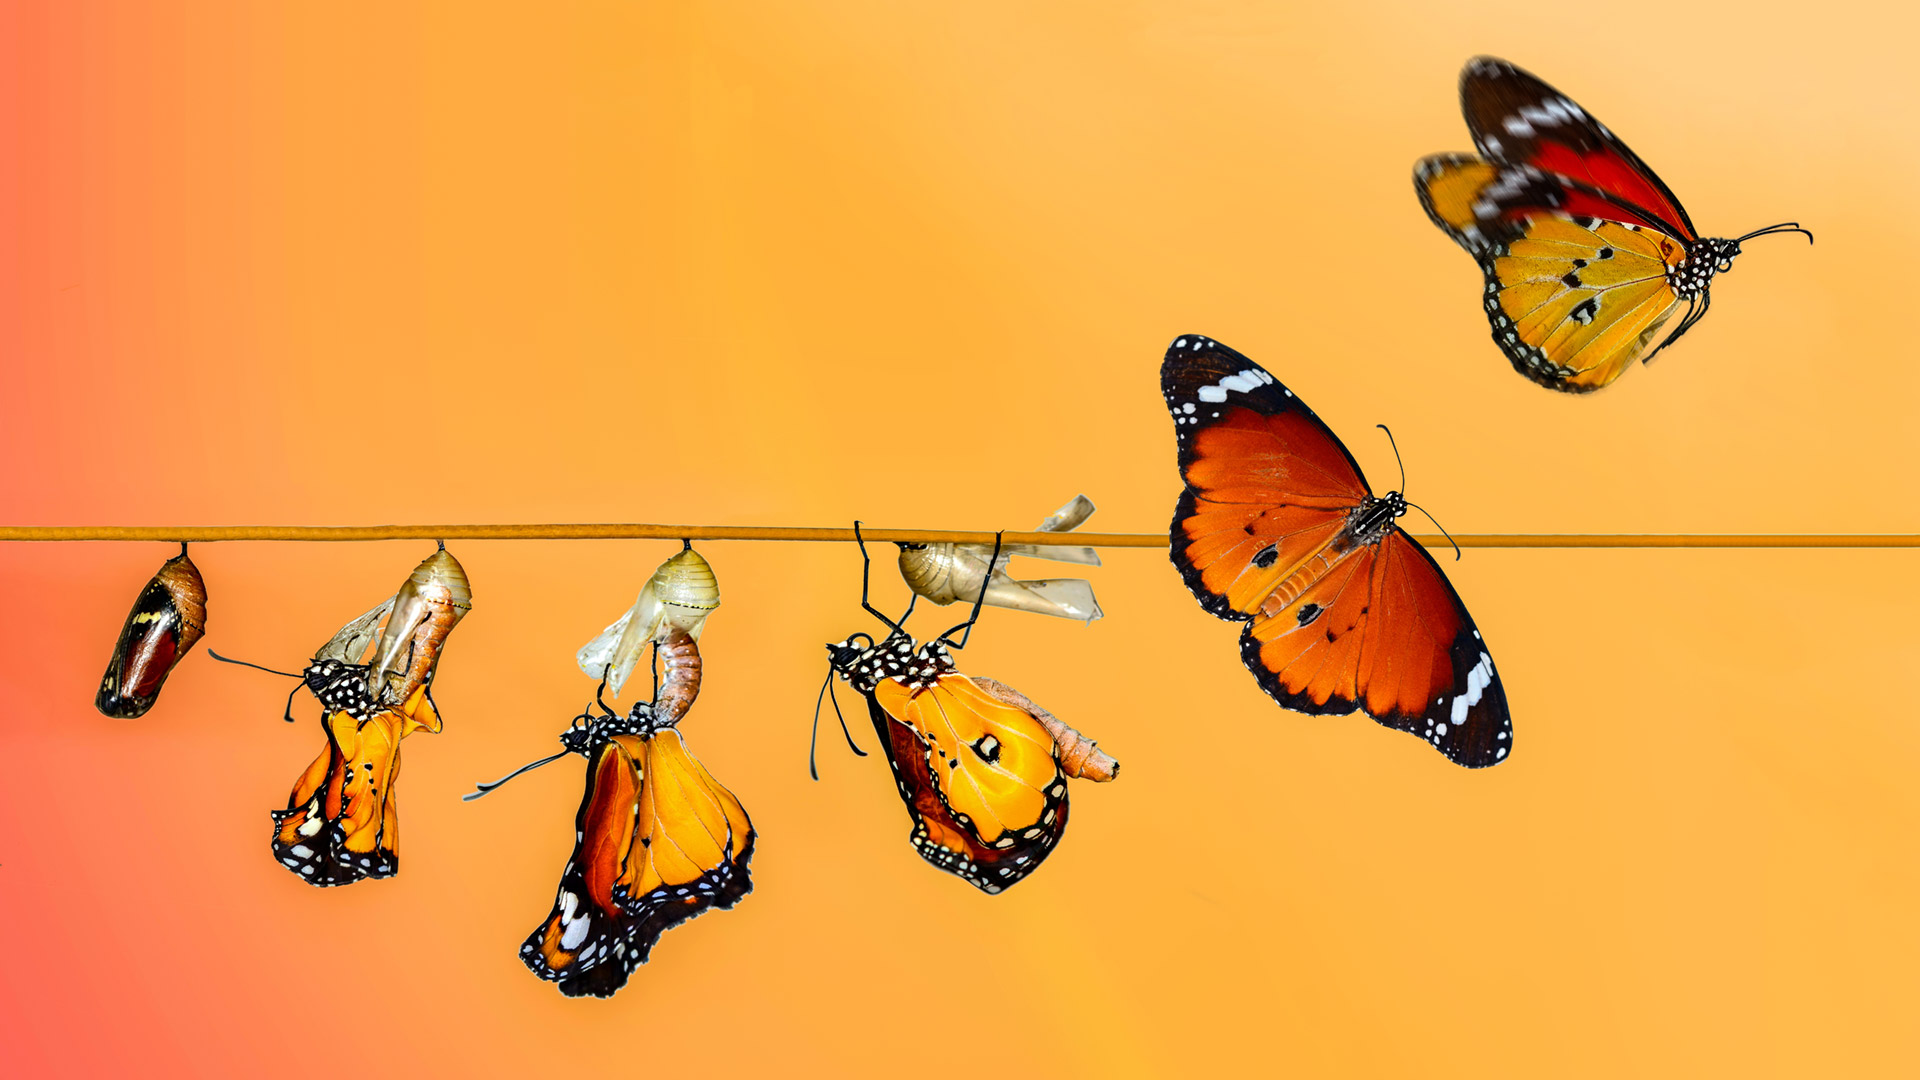 Evolution process of a butterfly